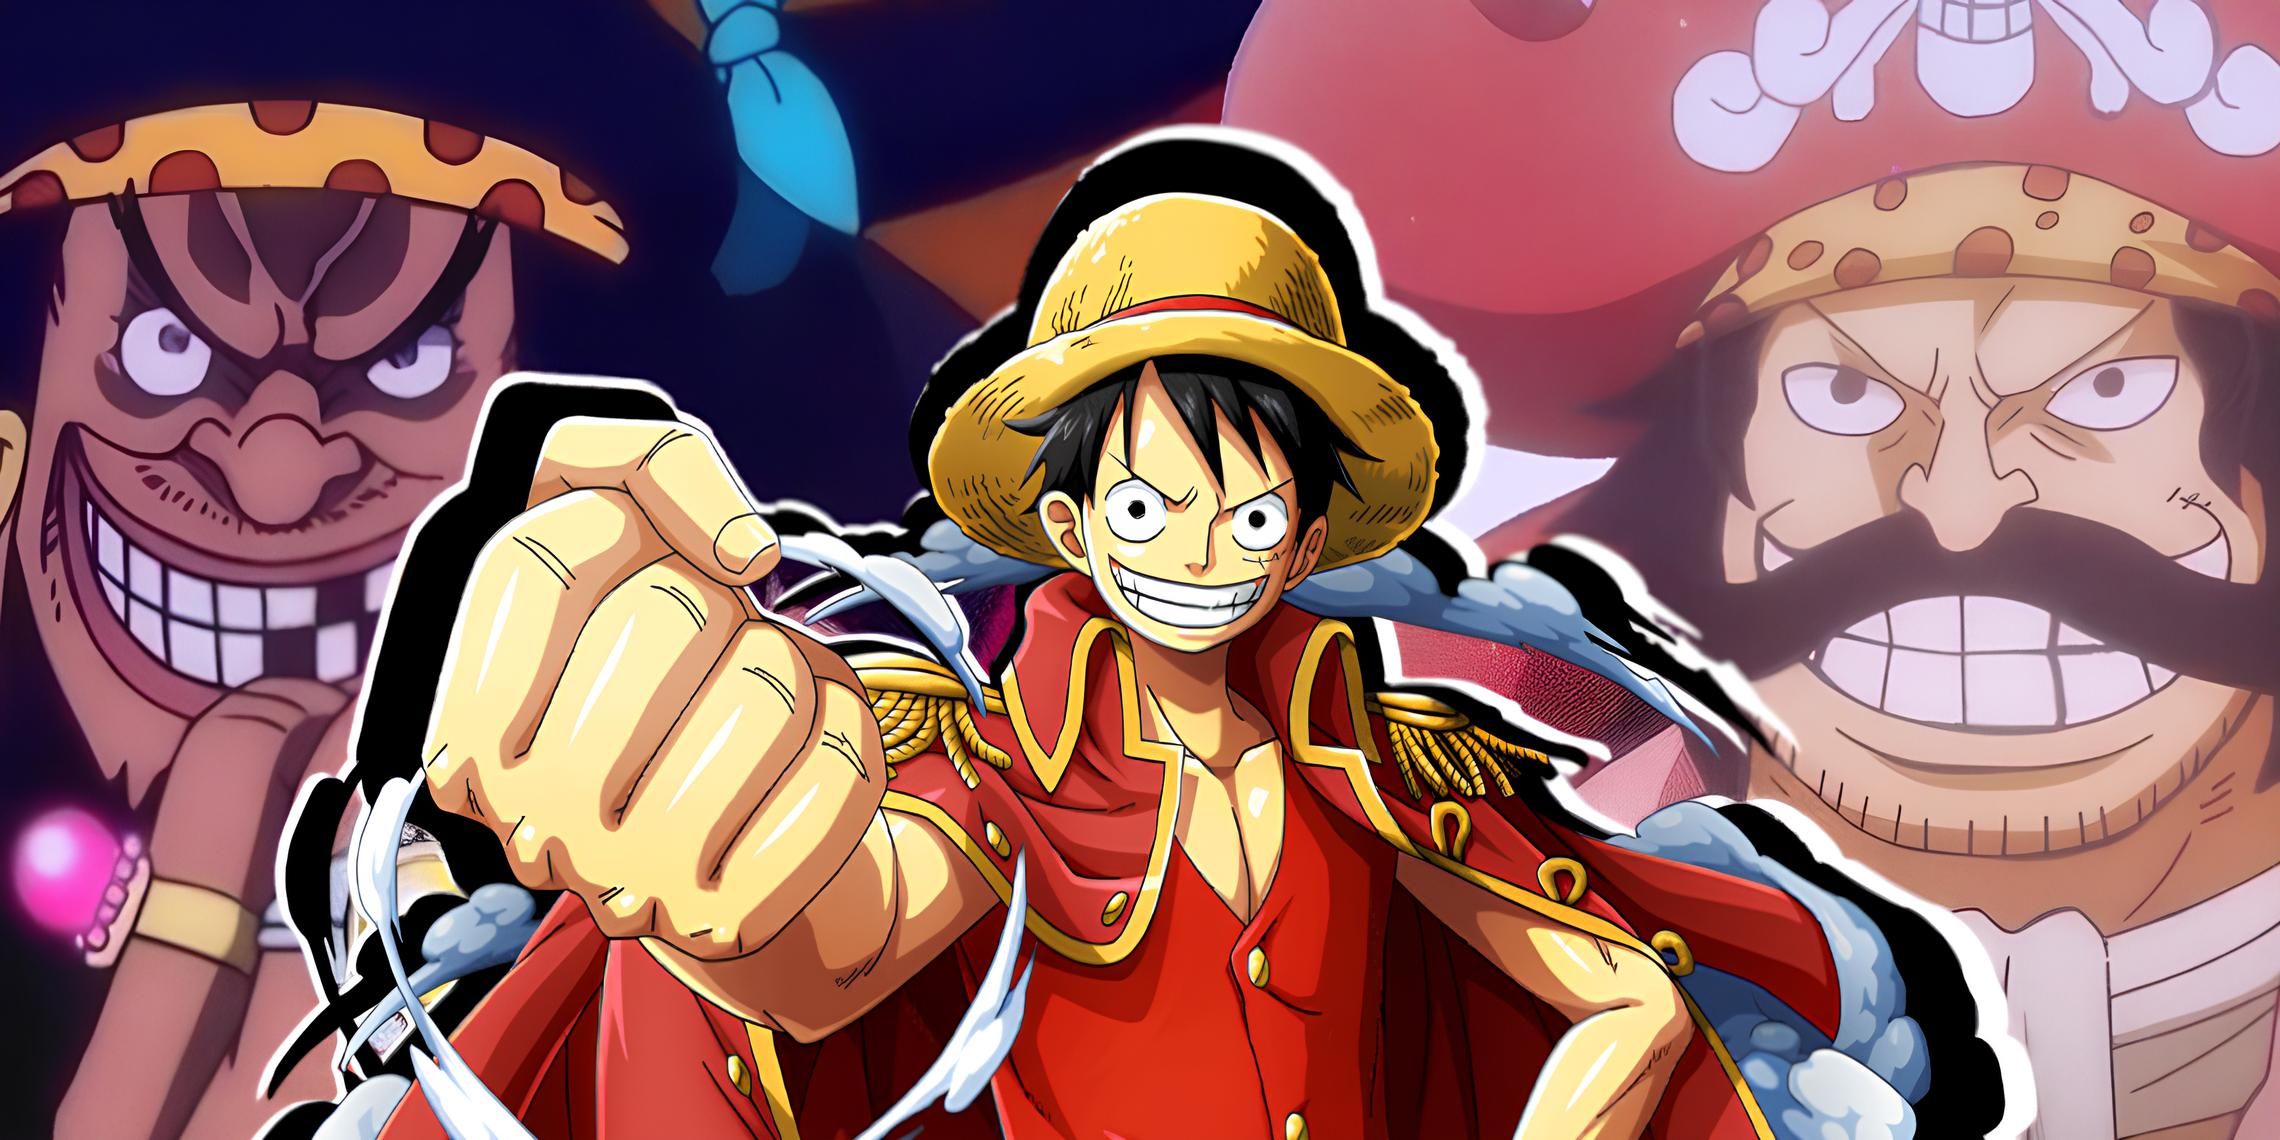 Monkey D. Luffy clenches fist, with Blackbeard and Gol D. Roger in the background